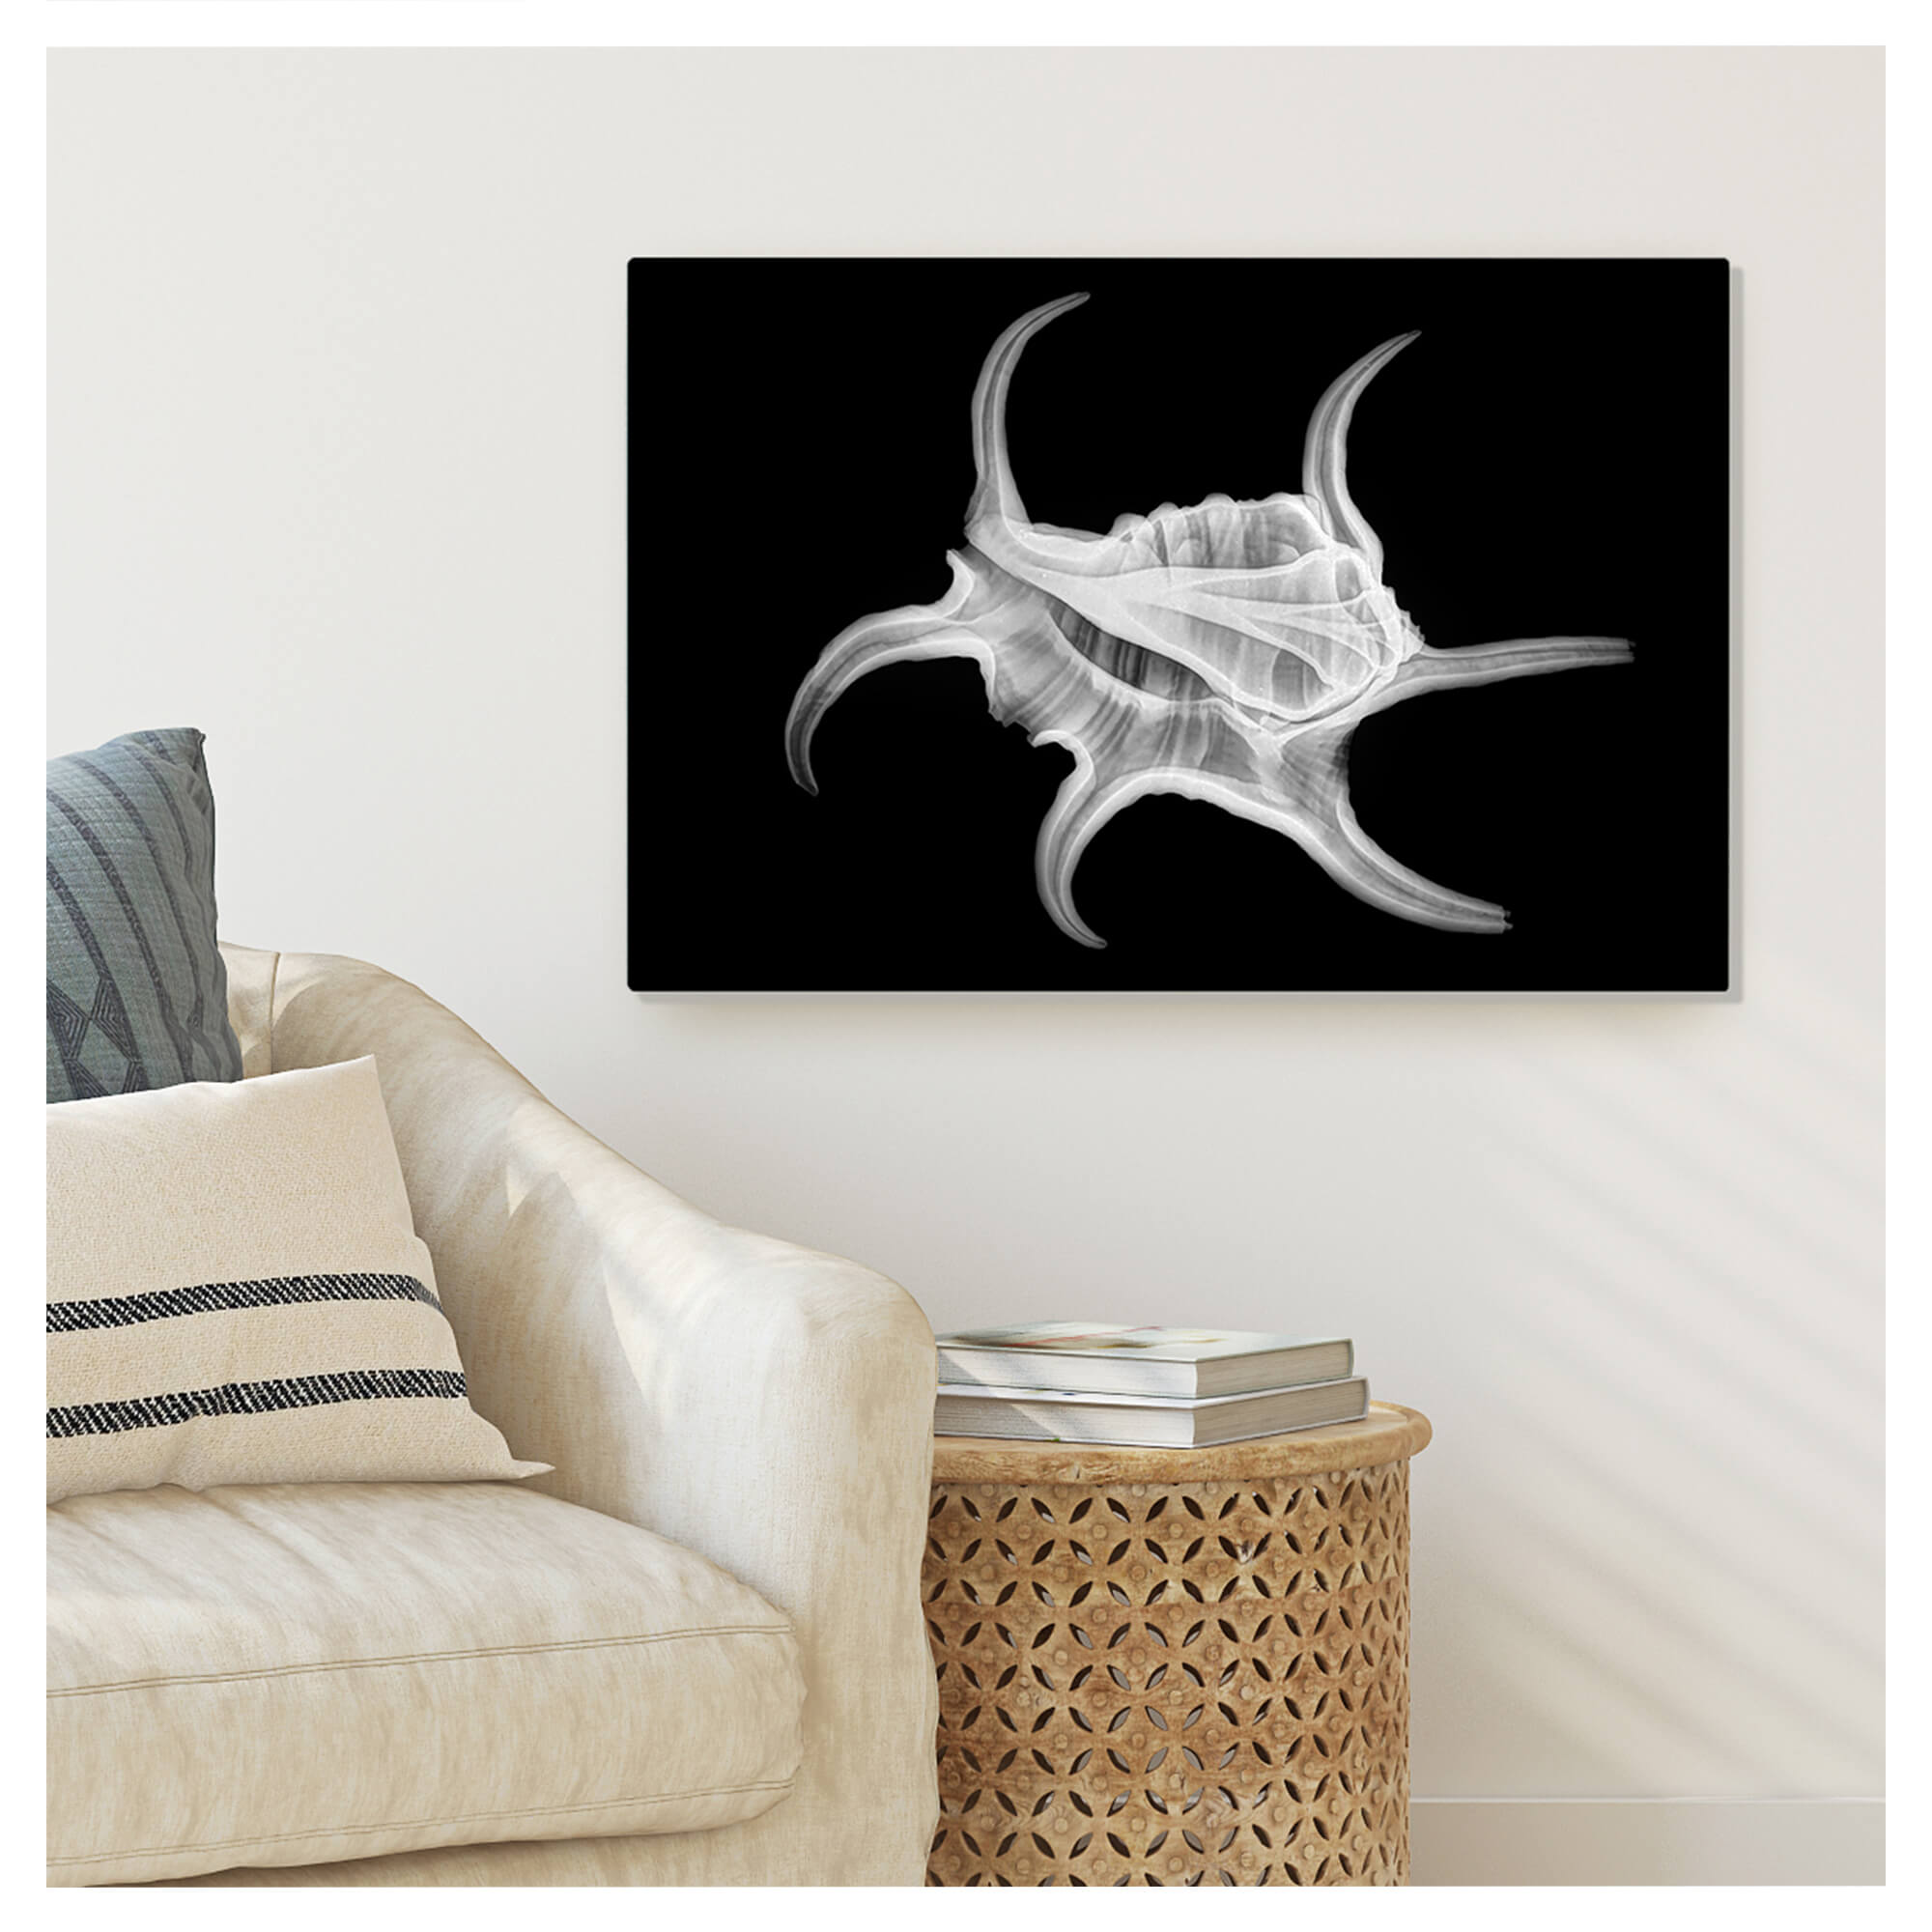 Metal art print wall mockup featuring a grayscale print of a spider conch by Hawaii artist Michelle Smith